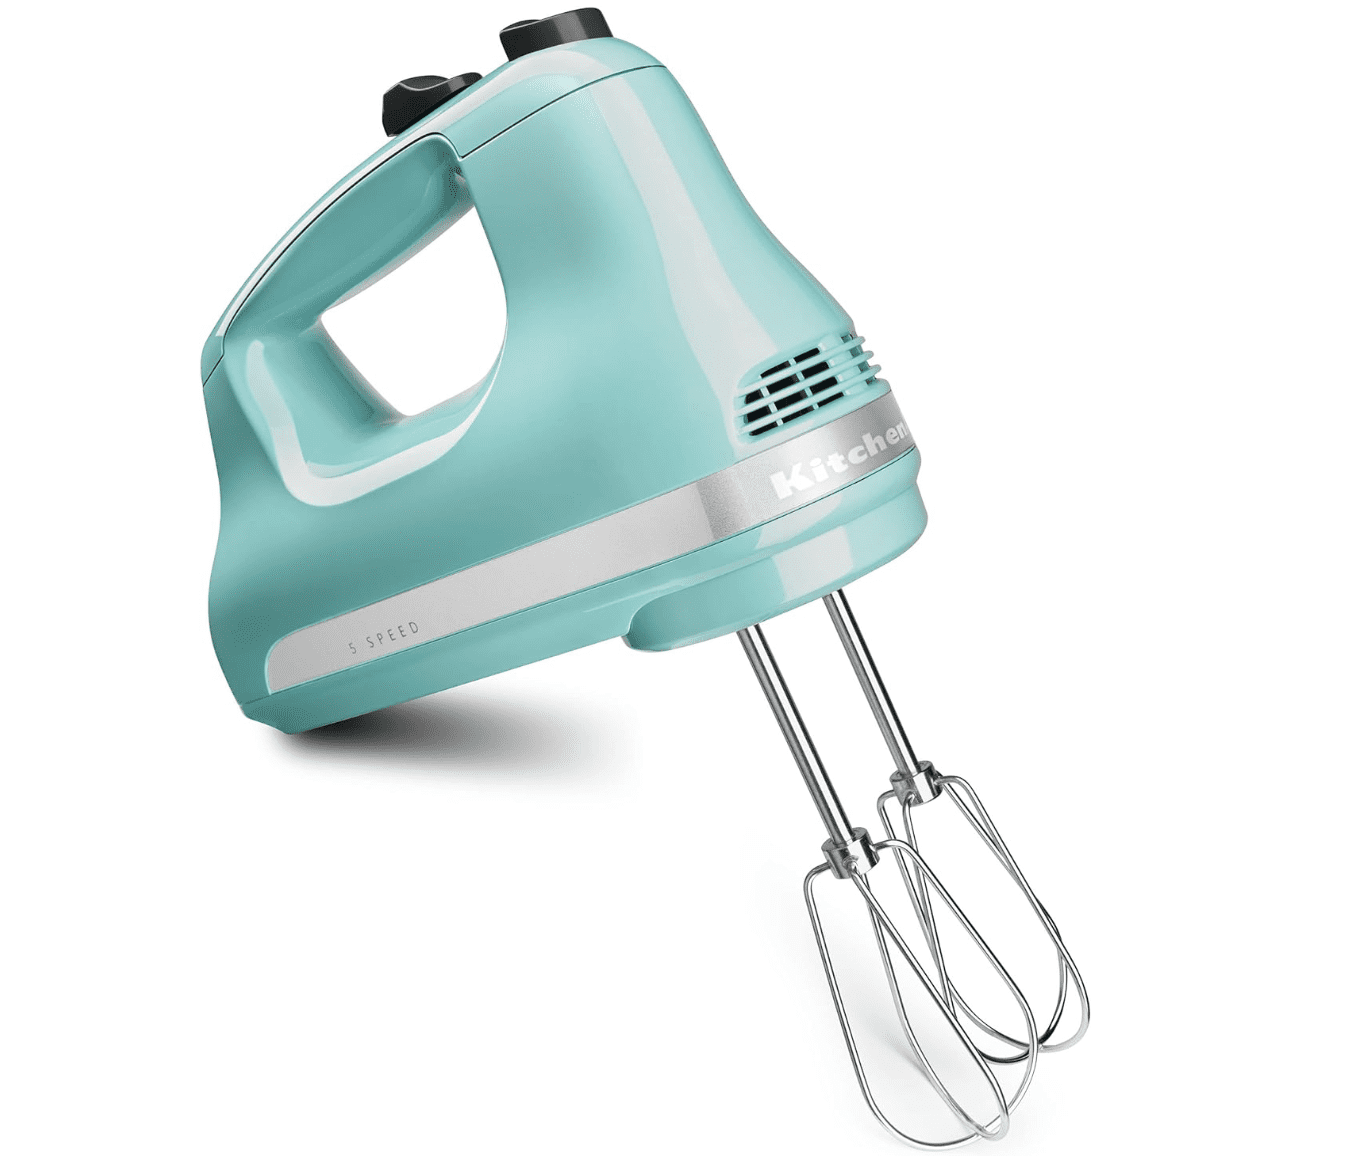 https://cdn.apartmenttherapy.info/image/upload/v1699291241/commerce/Amazon-KitchenAid-5-Speed-Hand-Mixer.png